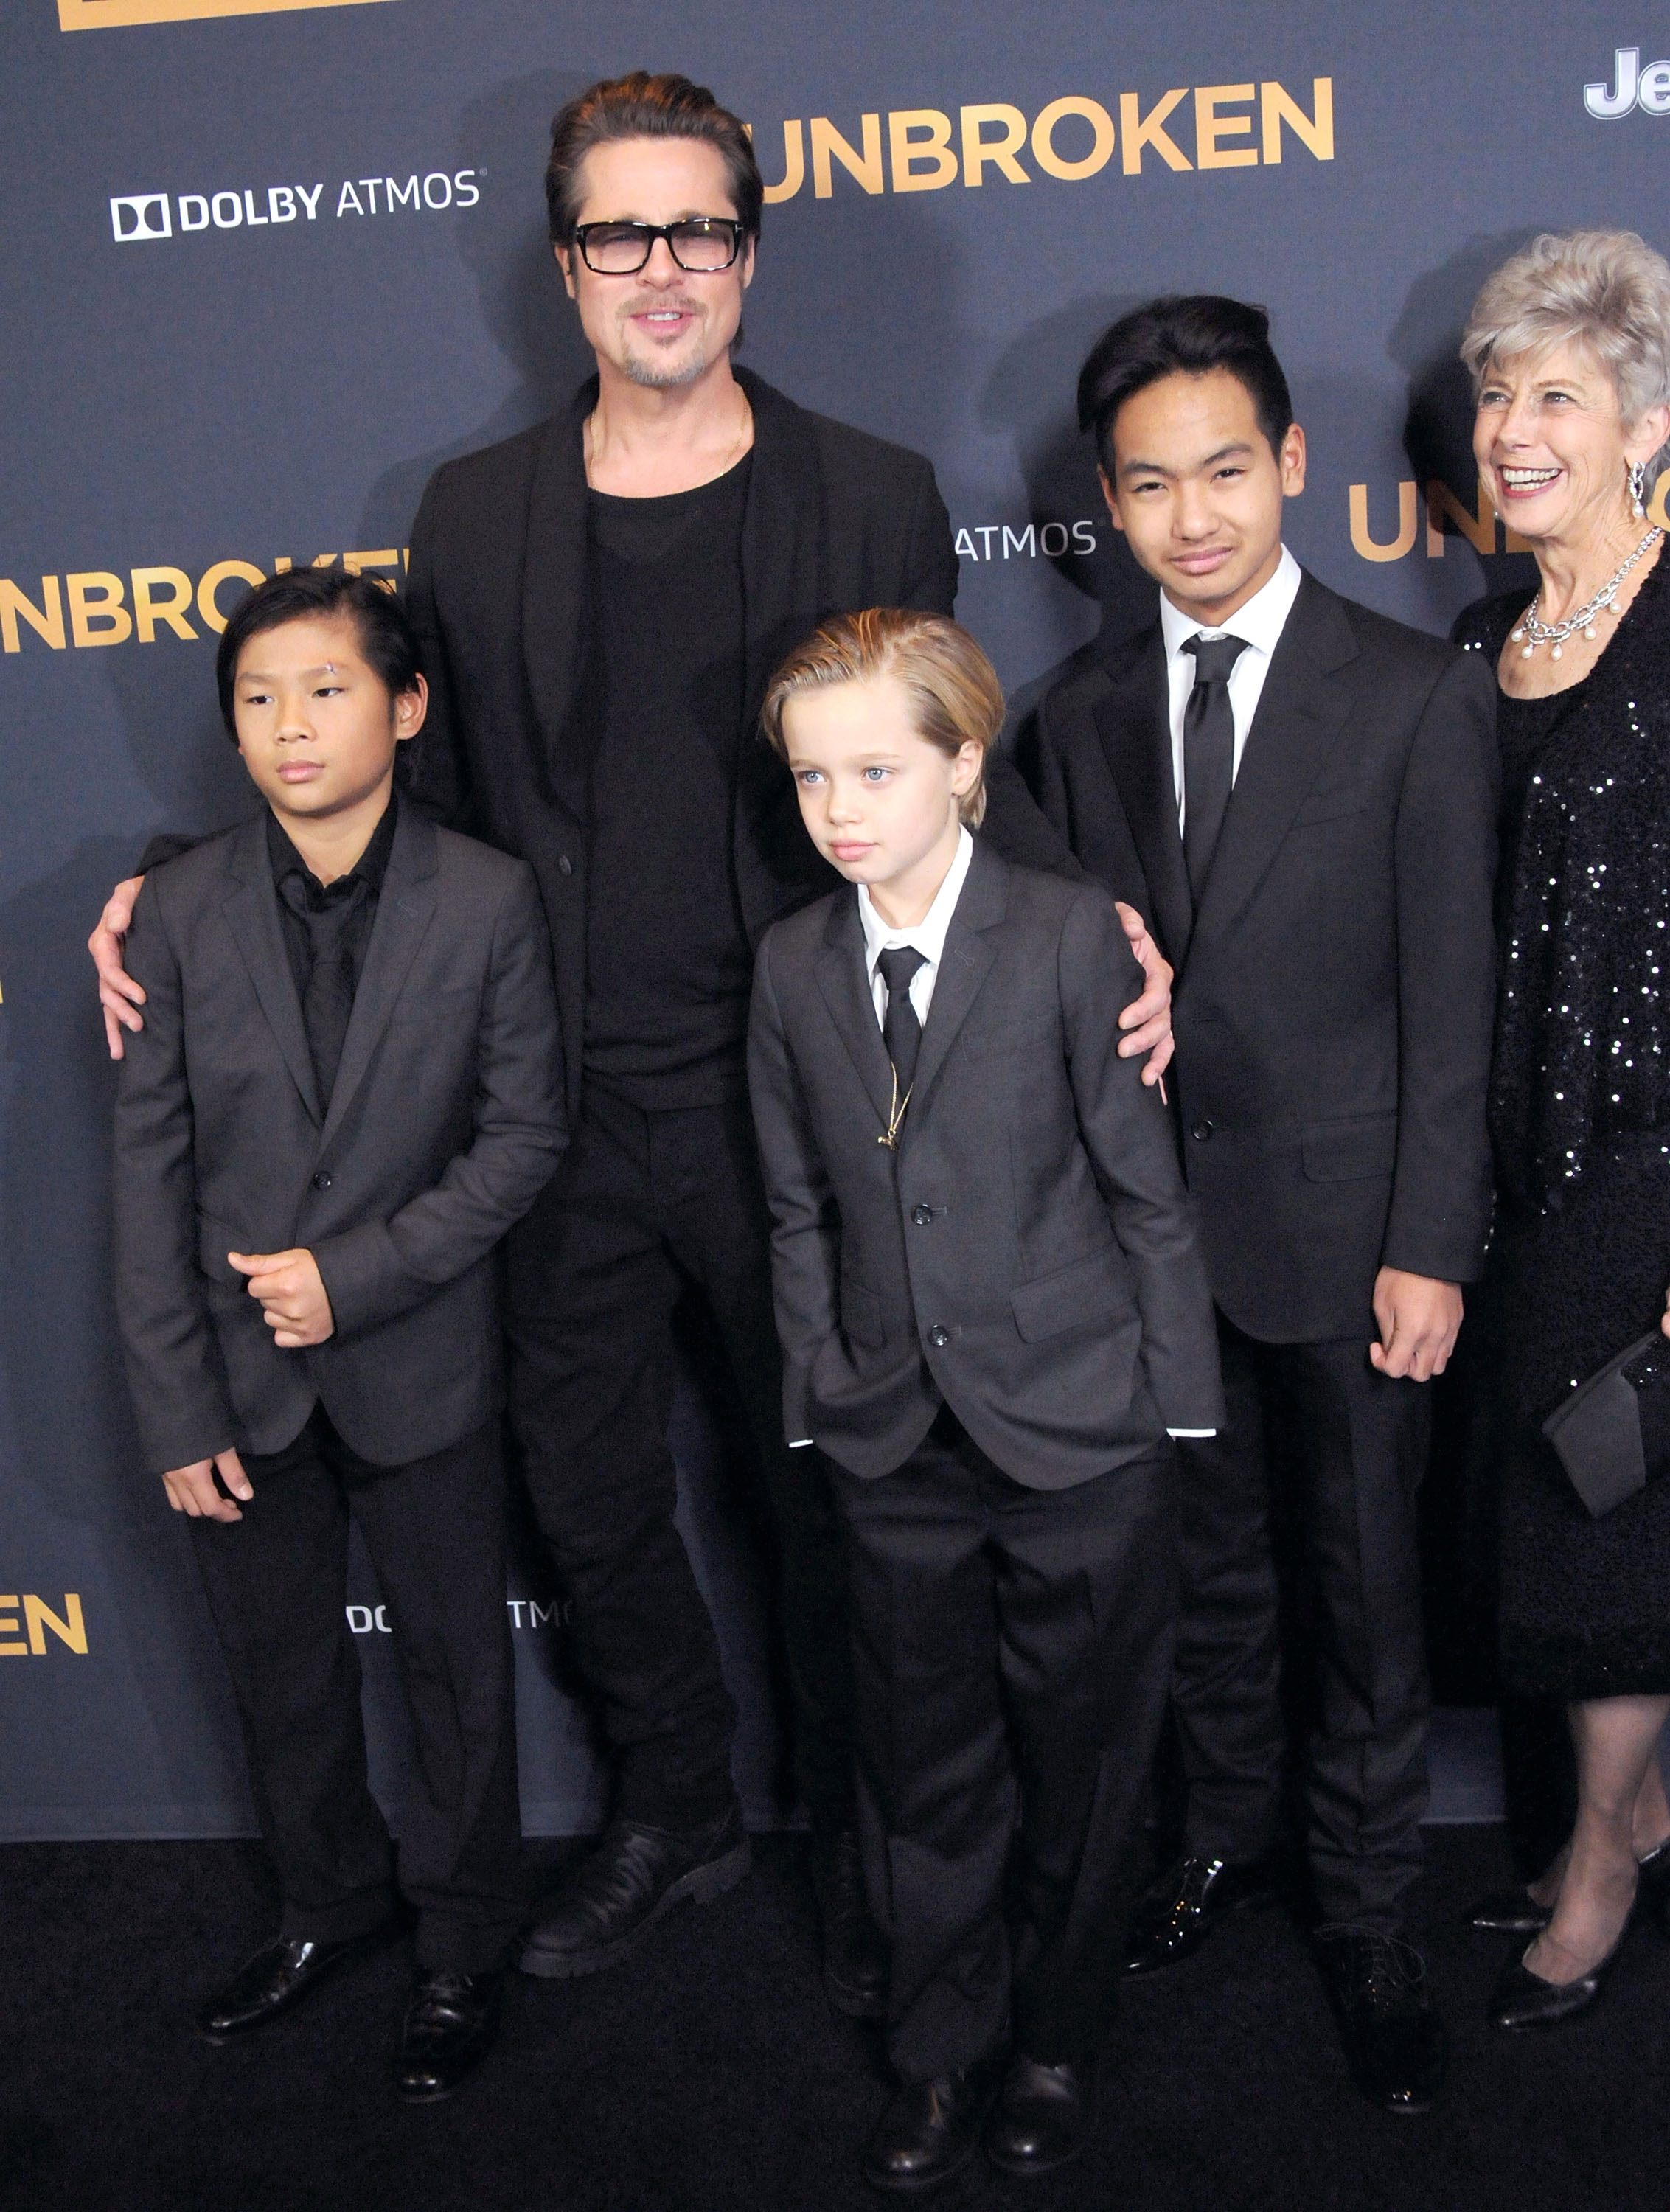 Pax Thien and Shiloh Nouvel Jolie Pitt, Brad Pitt, Maddox Jolie Pitt, and Jane Pitt at the premiere of "Unbroken" on December 15, 2014, in Hollywood, California. | Source: Getty Images